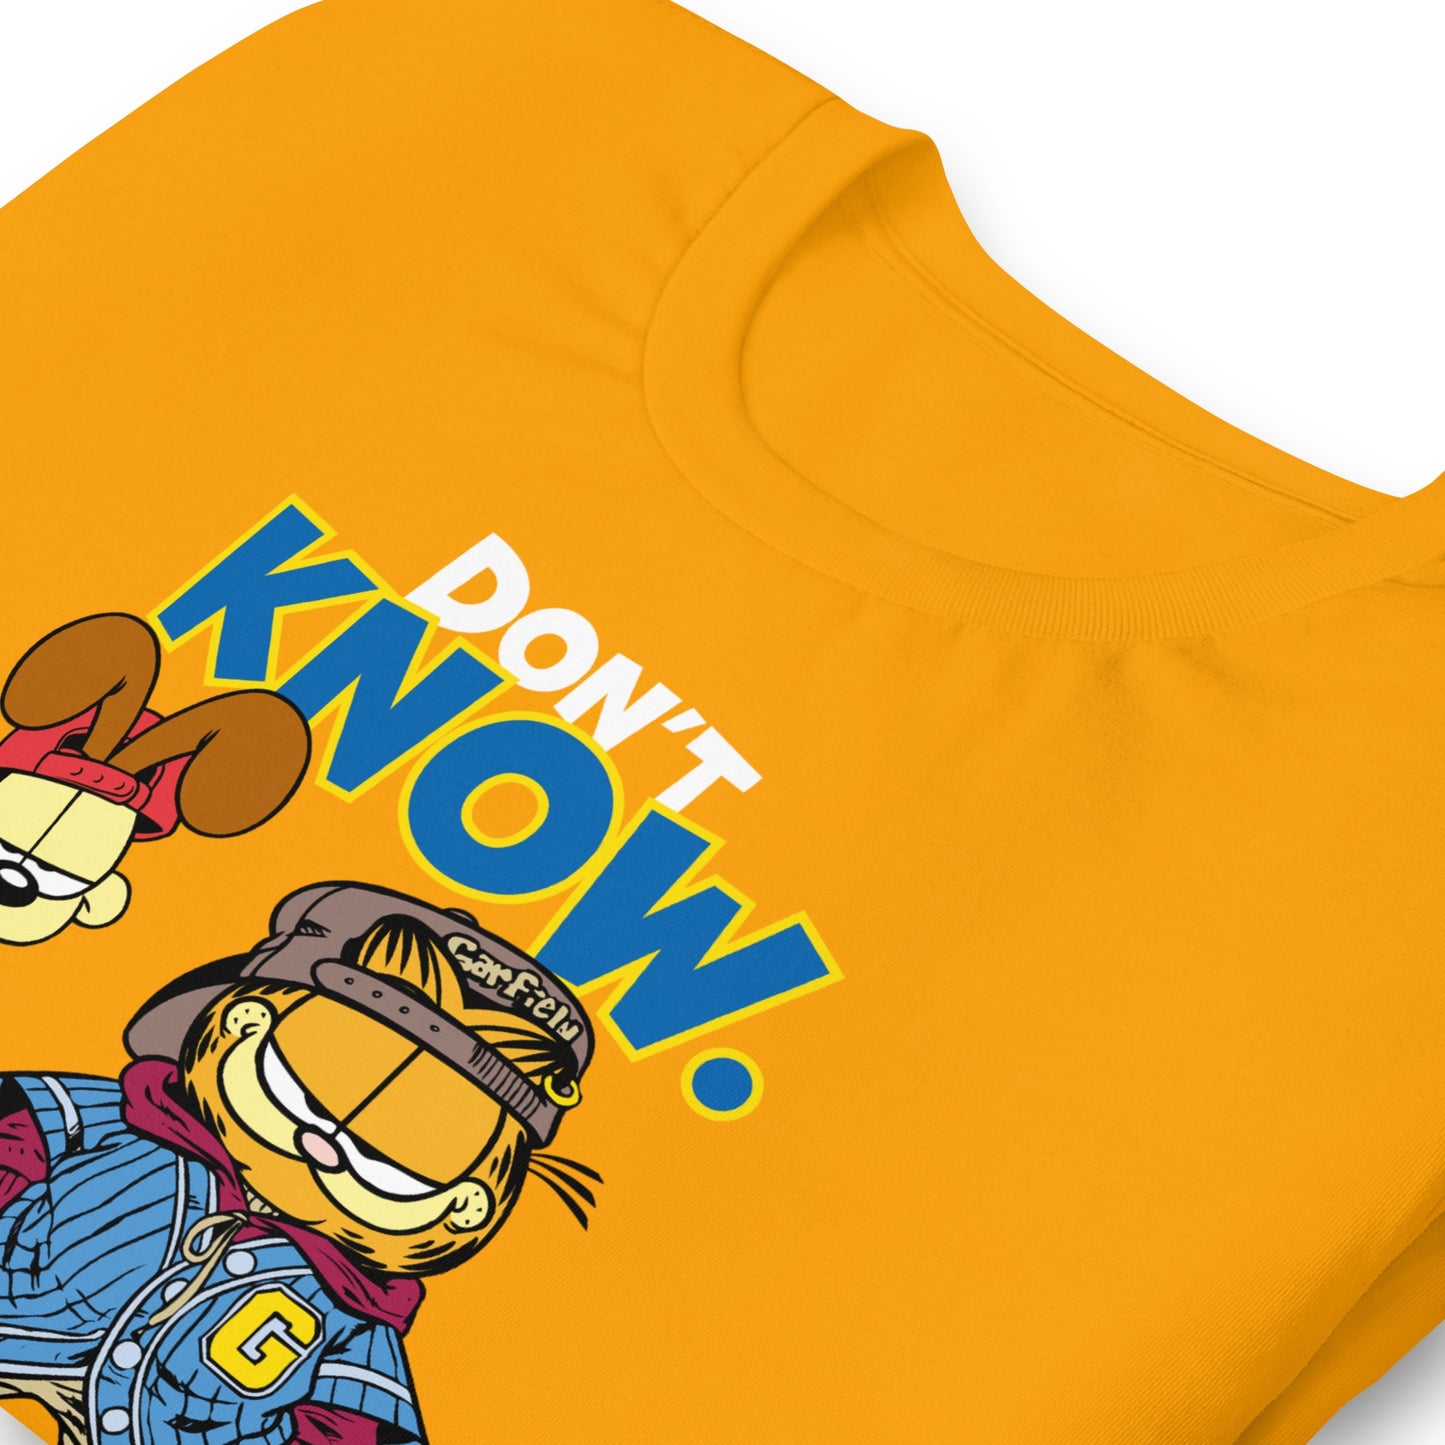 Garfield T-shirt "Don't Know Don't Care